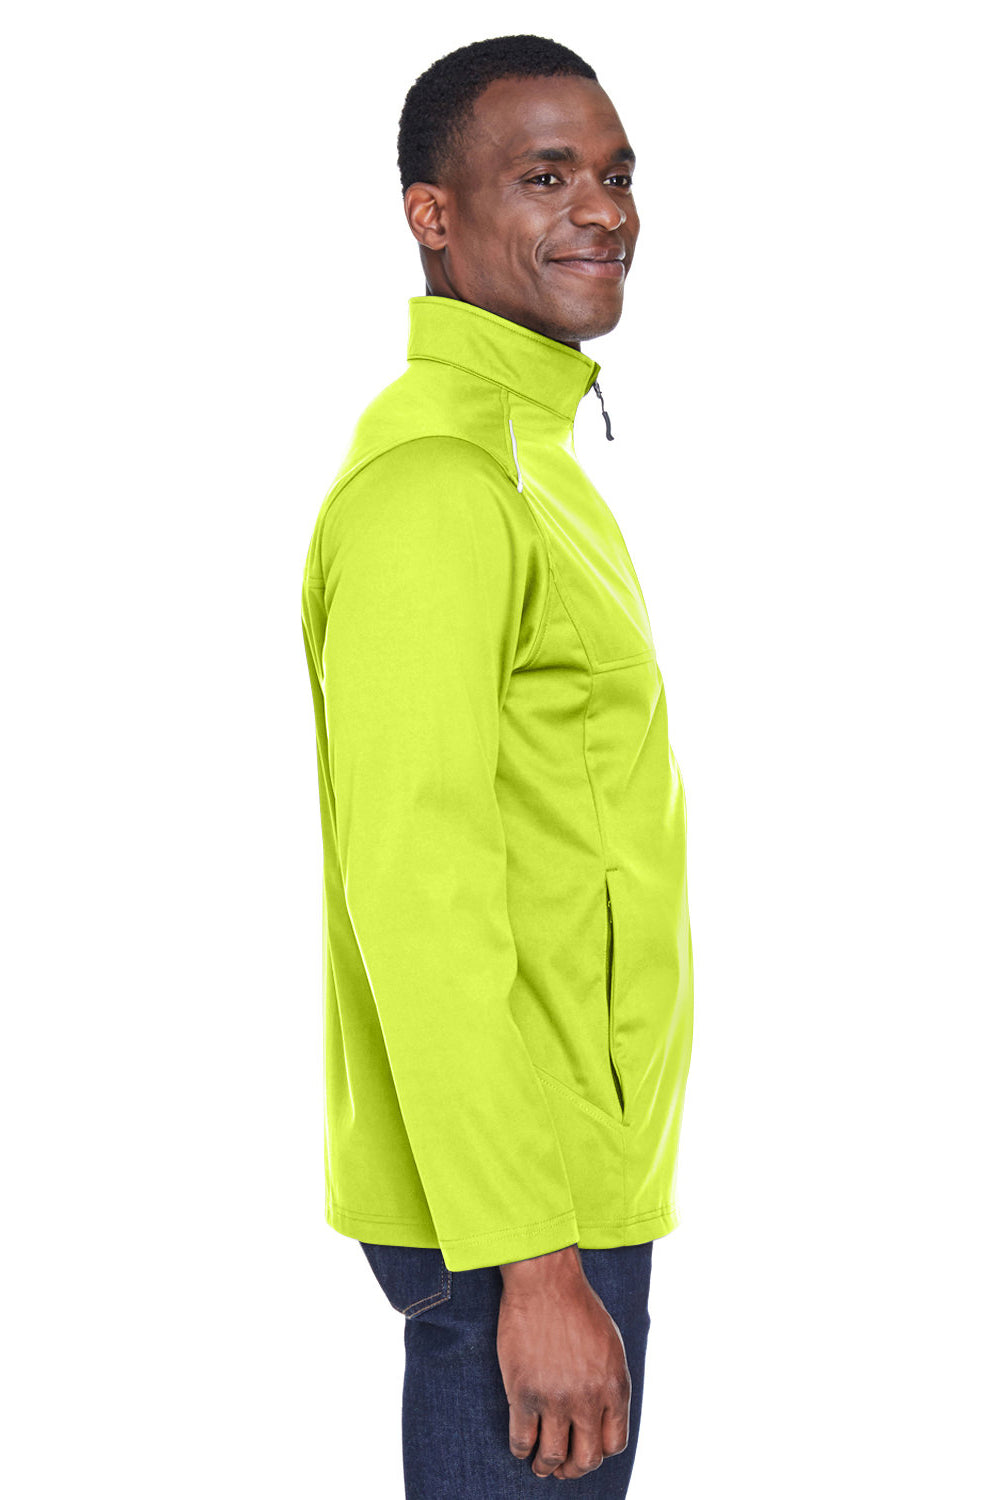 Core 365 CE708 Mens Techno Lite Water Resistant Full Zip Jacket Safety Yellow SIde